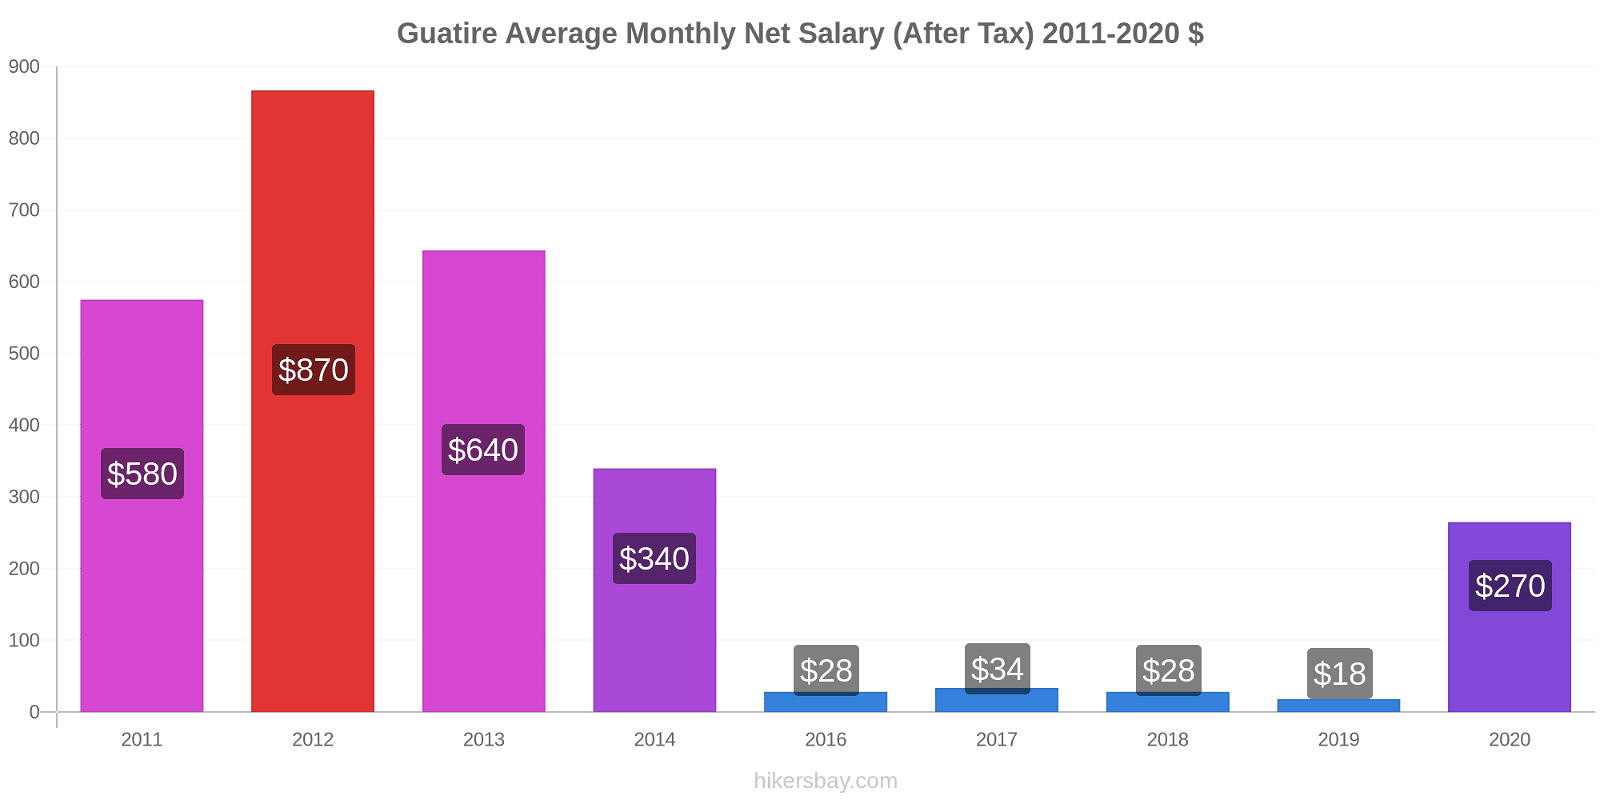 Guatire price changes Average Monthly Net Salary (After Tax) hikersbay.com